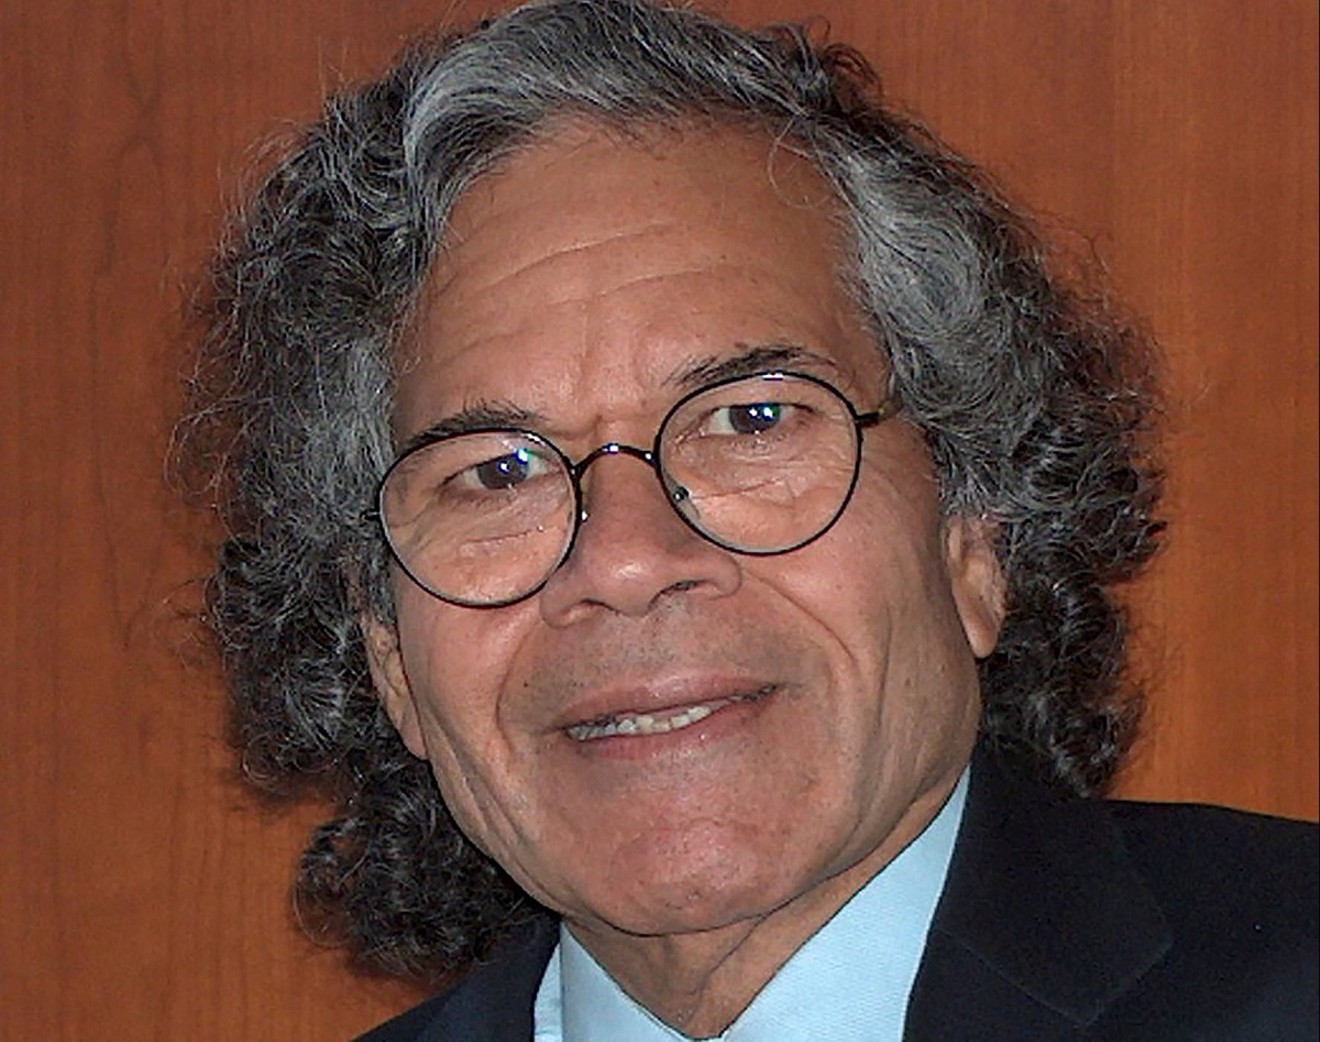 John Kapoor, founder and former chairman of Insys Therapeutics, is scheduled to be sentenced on Thursday, January 23. Several other Insys executives were sentenced this week.